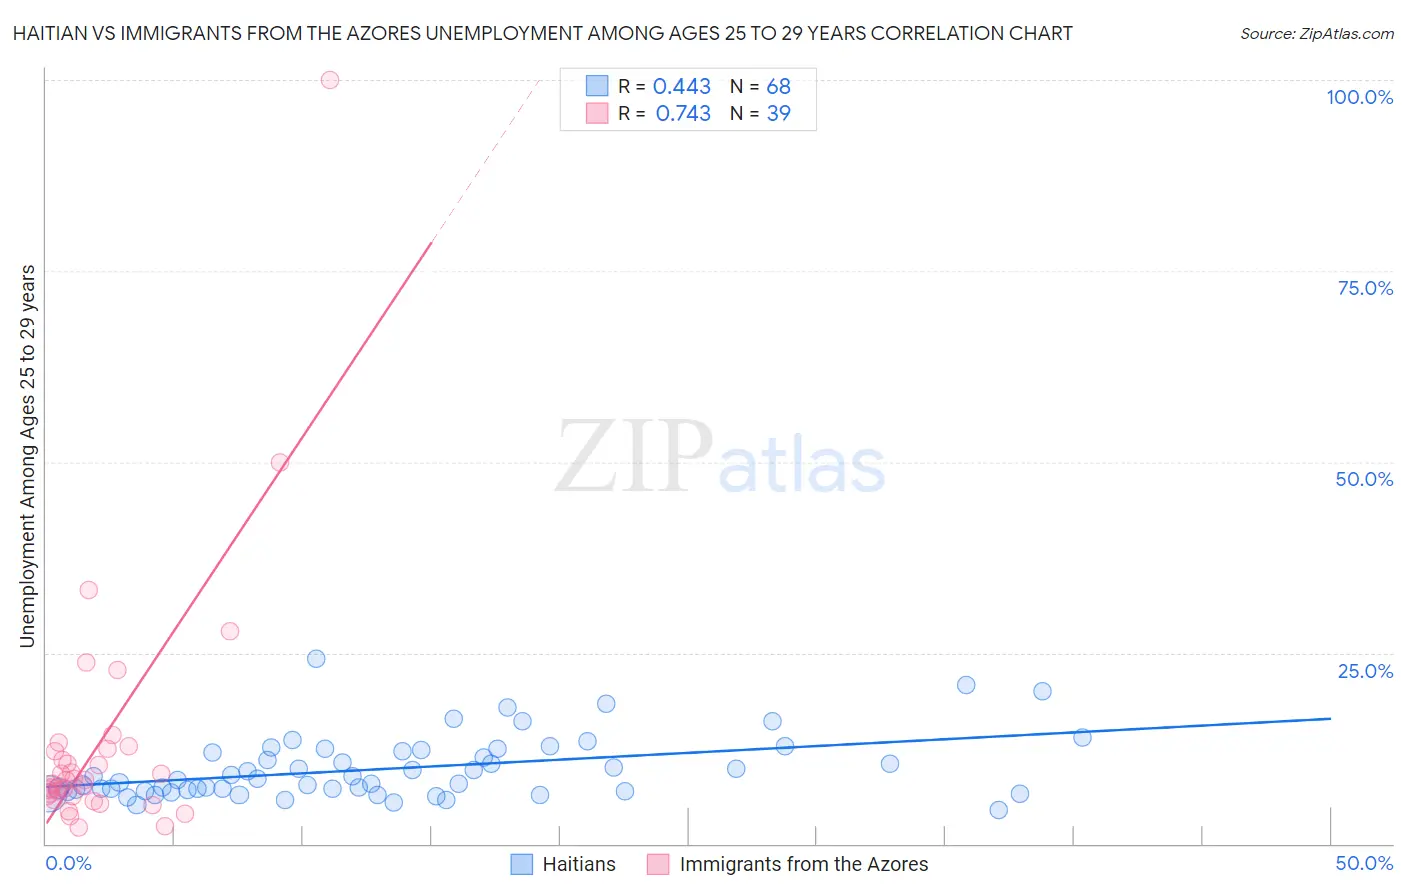 Haitian vs Immigrants from the Azores Unemployment Among Ages 25 to 29 years